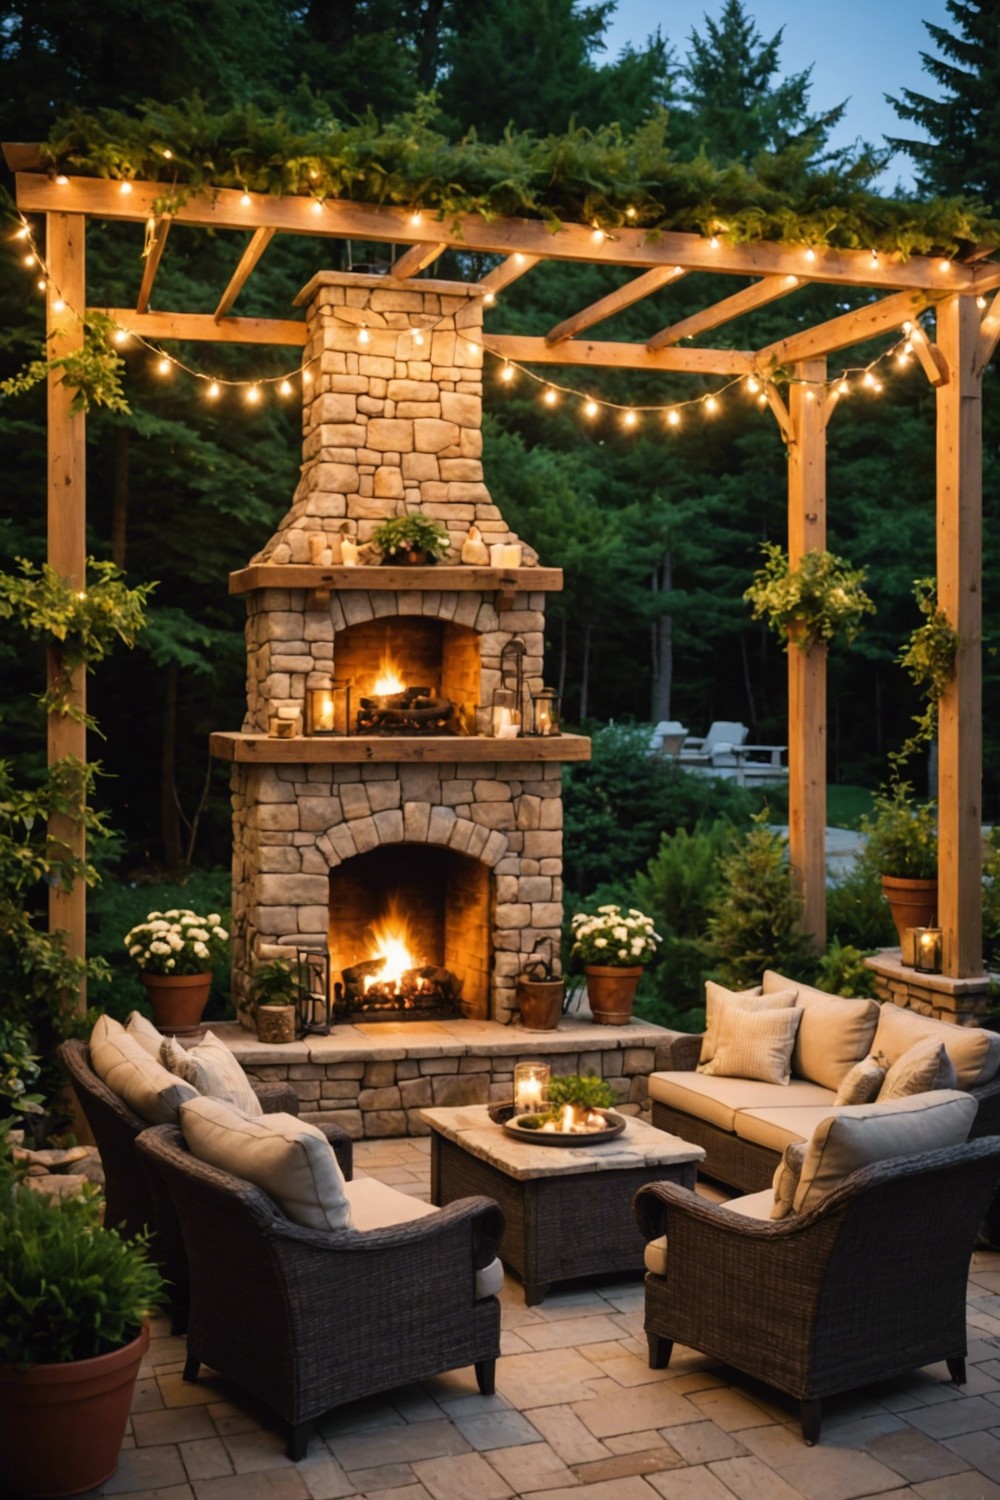 Outdoor Living Room with Fireplace